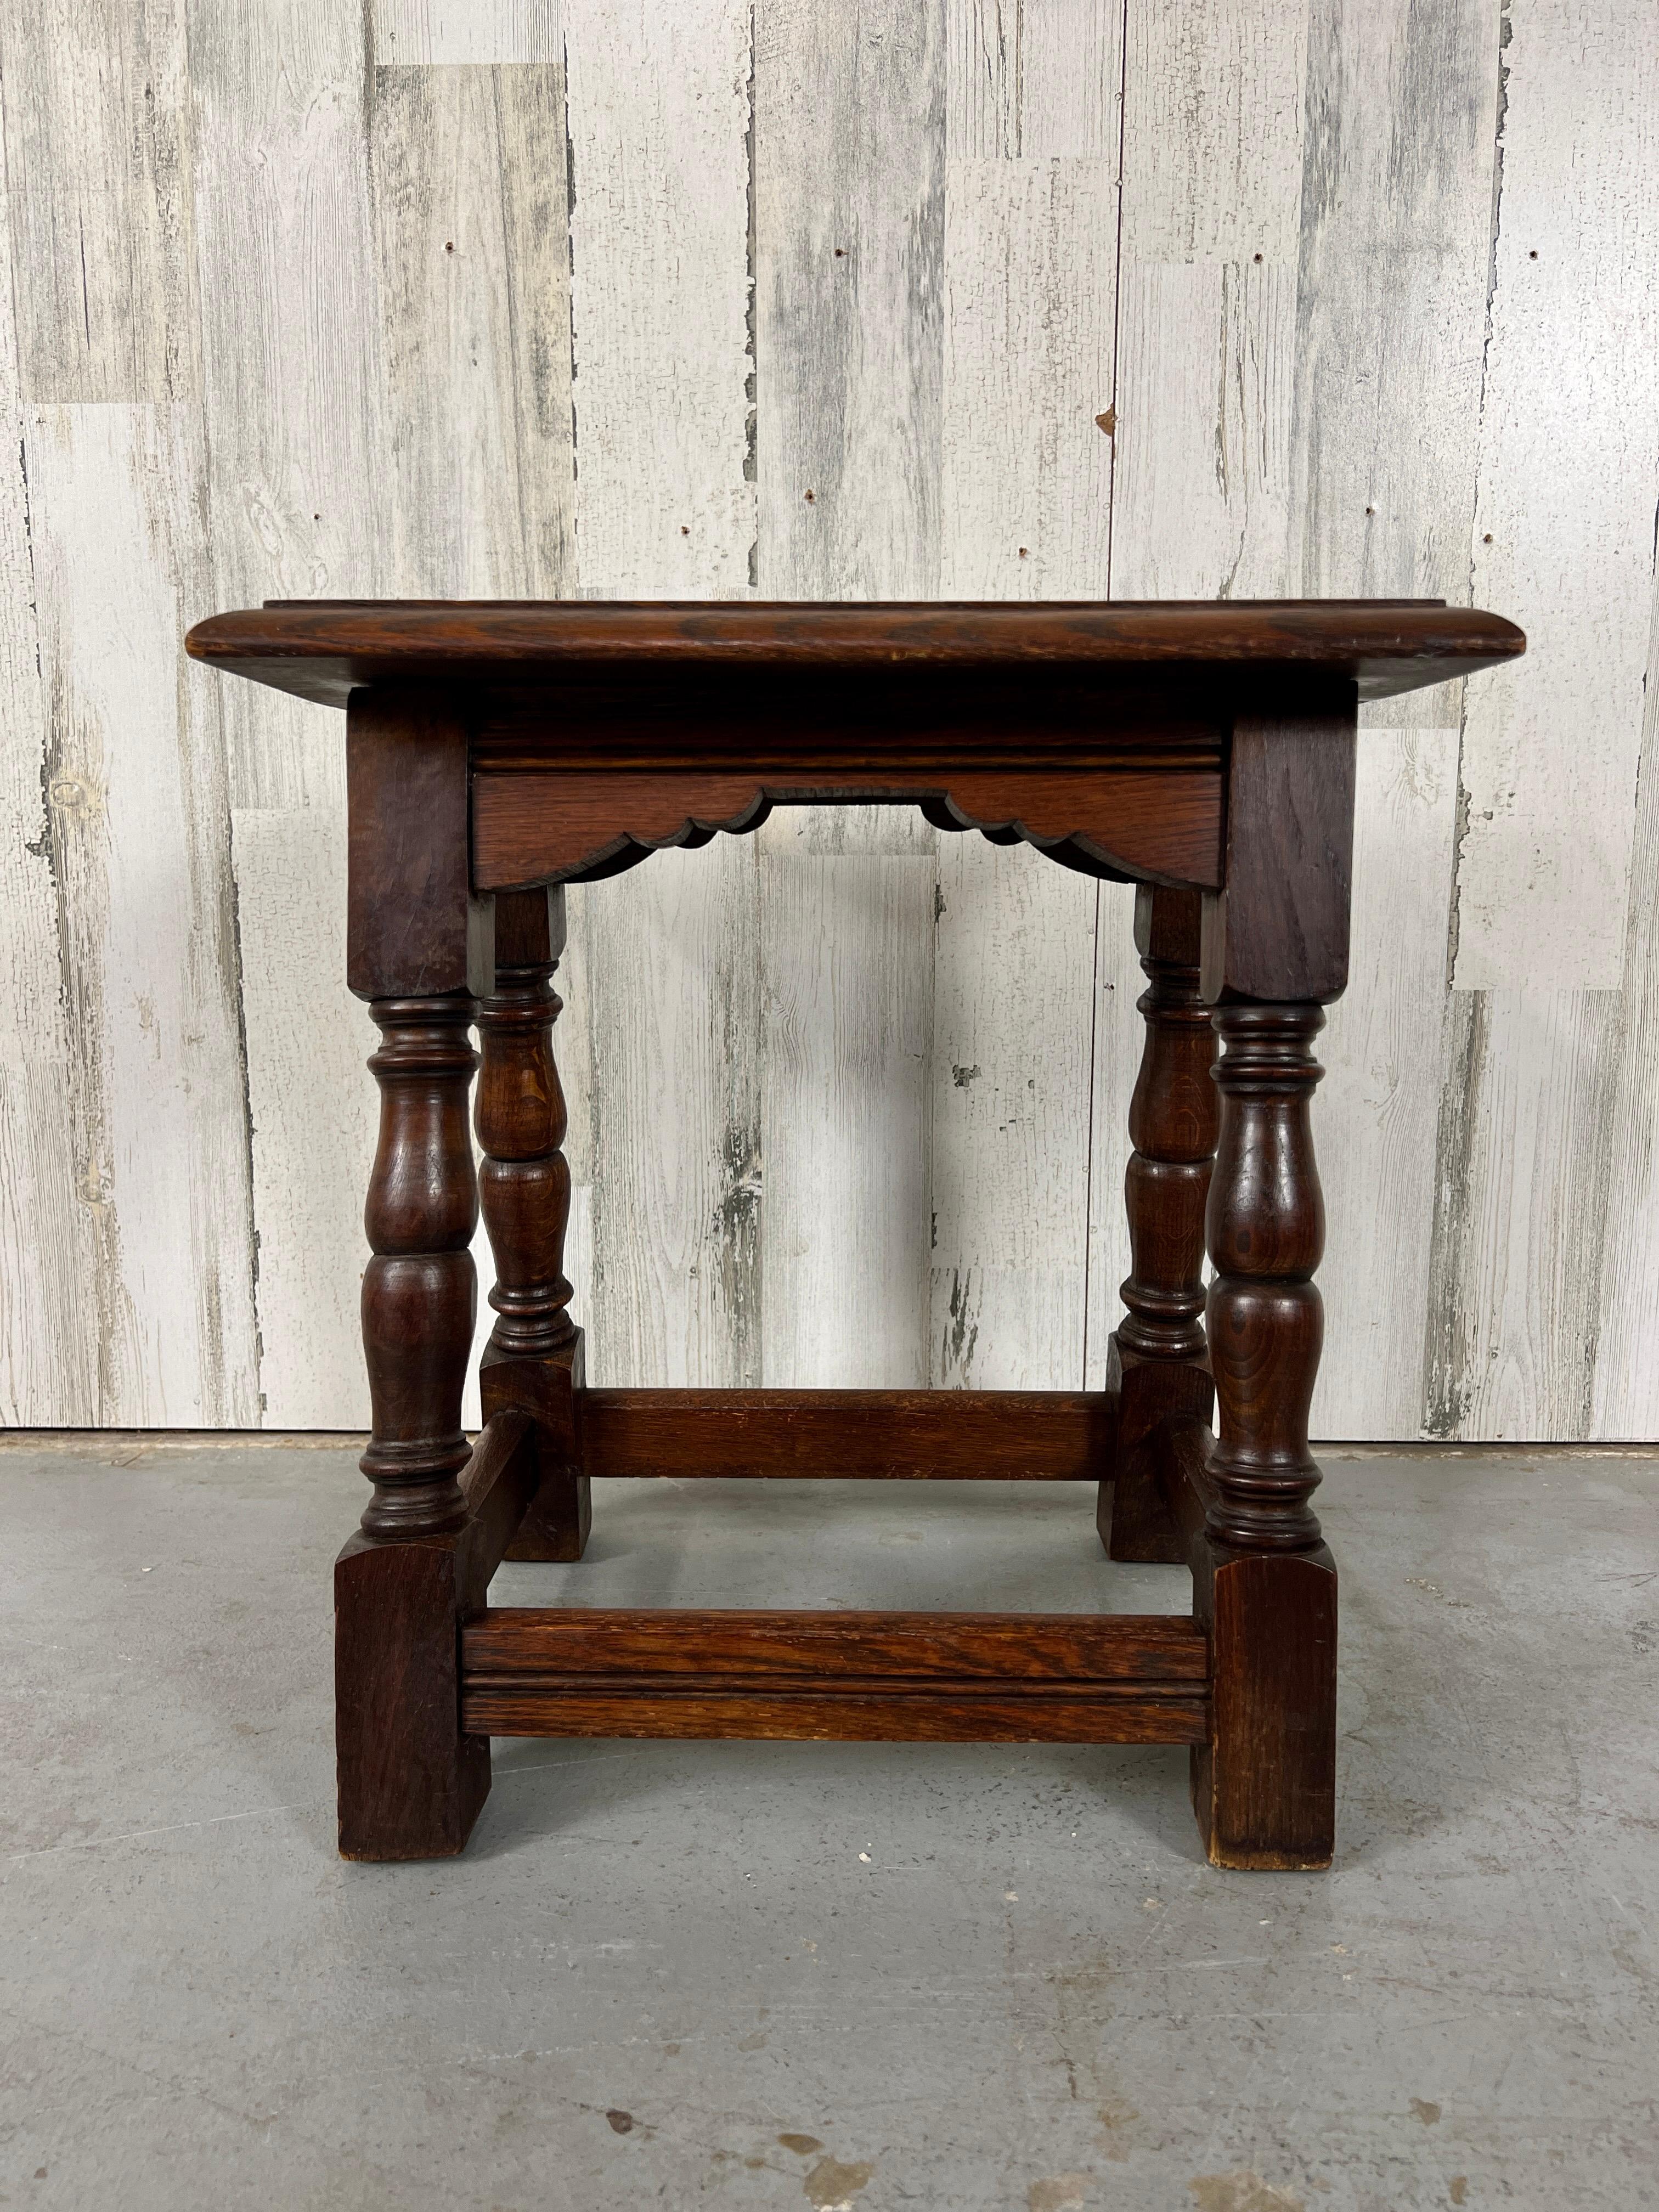 Rustic solid oak European stool with turned legs set on an angular sprawl. This can also be used as a table.